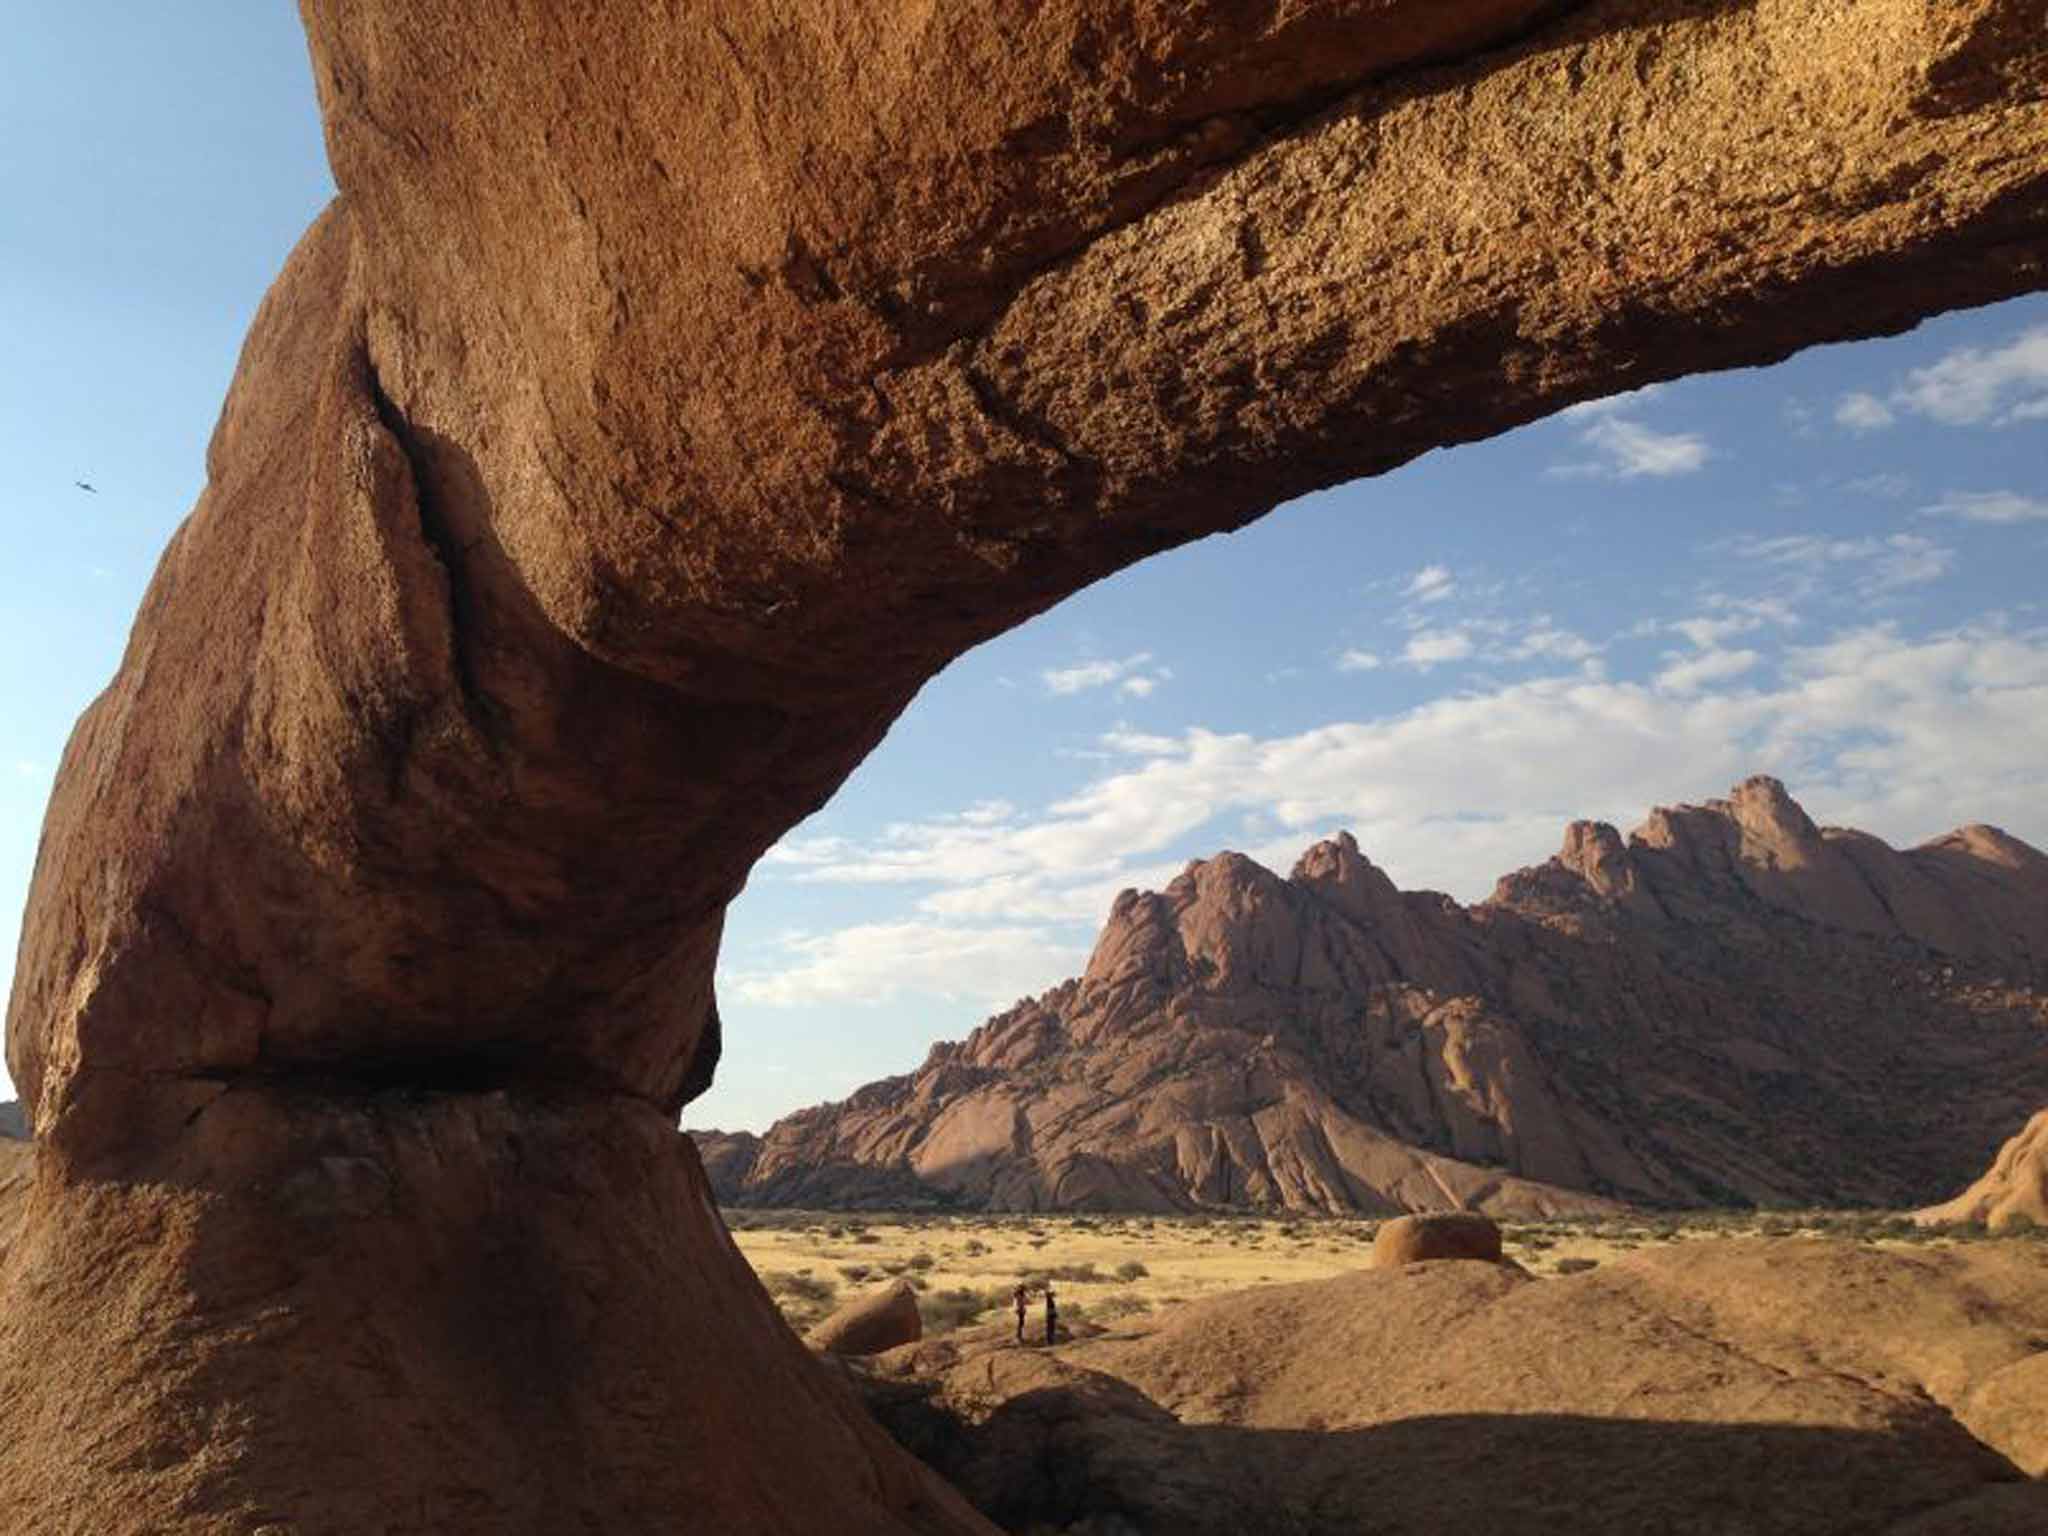 The 'eerie curves' of Spitzkoppe